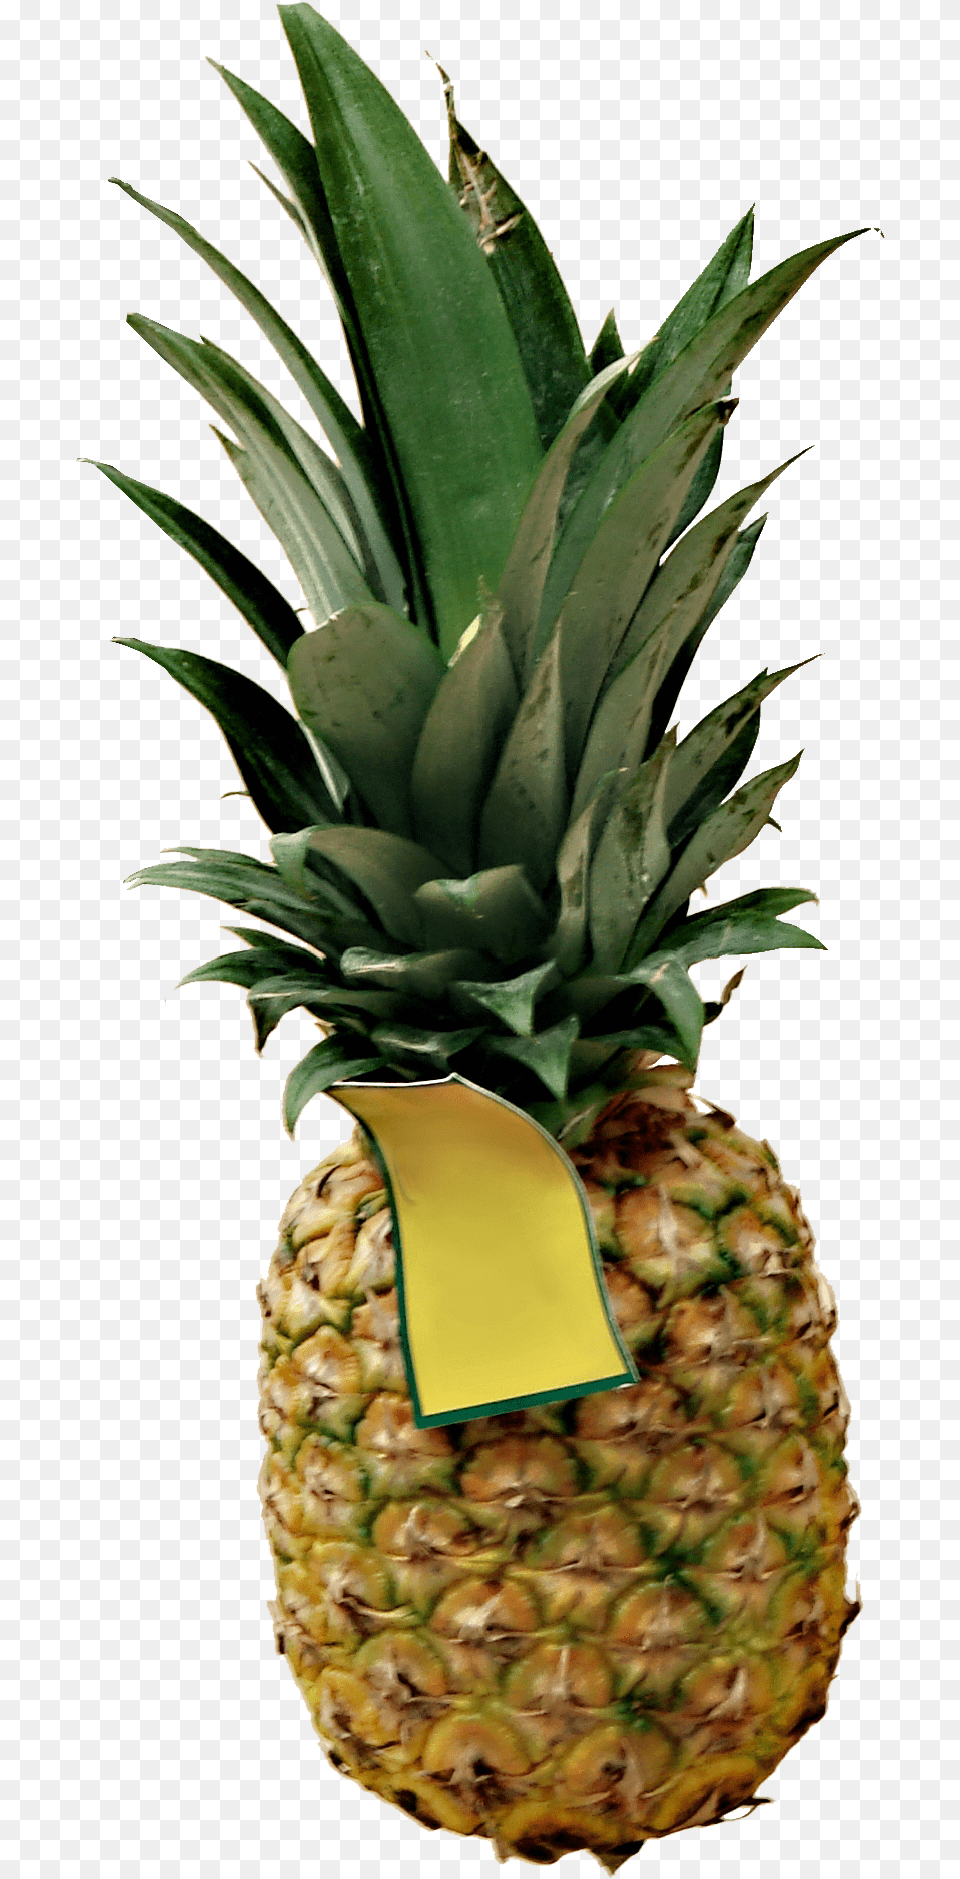 High Definition Pineapple Picture Download Portable Network Graphics, Food, Fruit, Plant, Produce Png Image